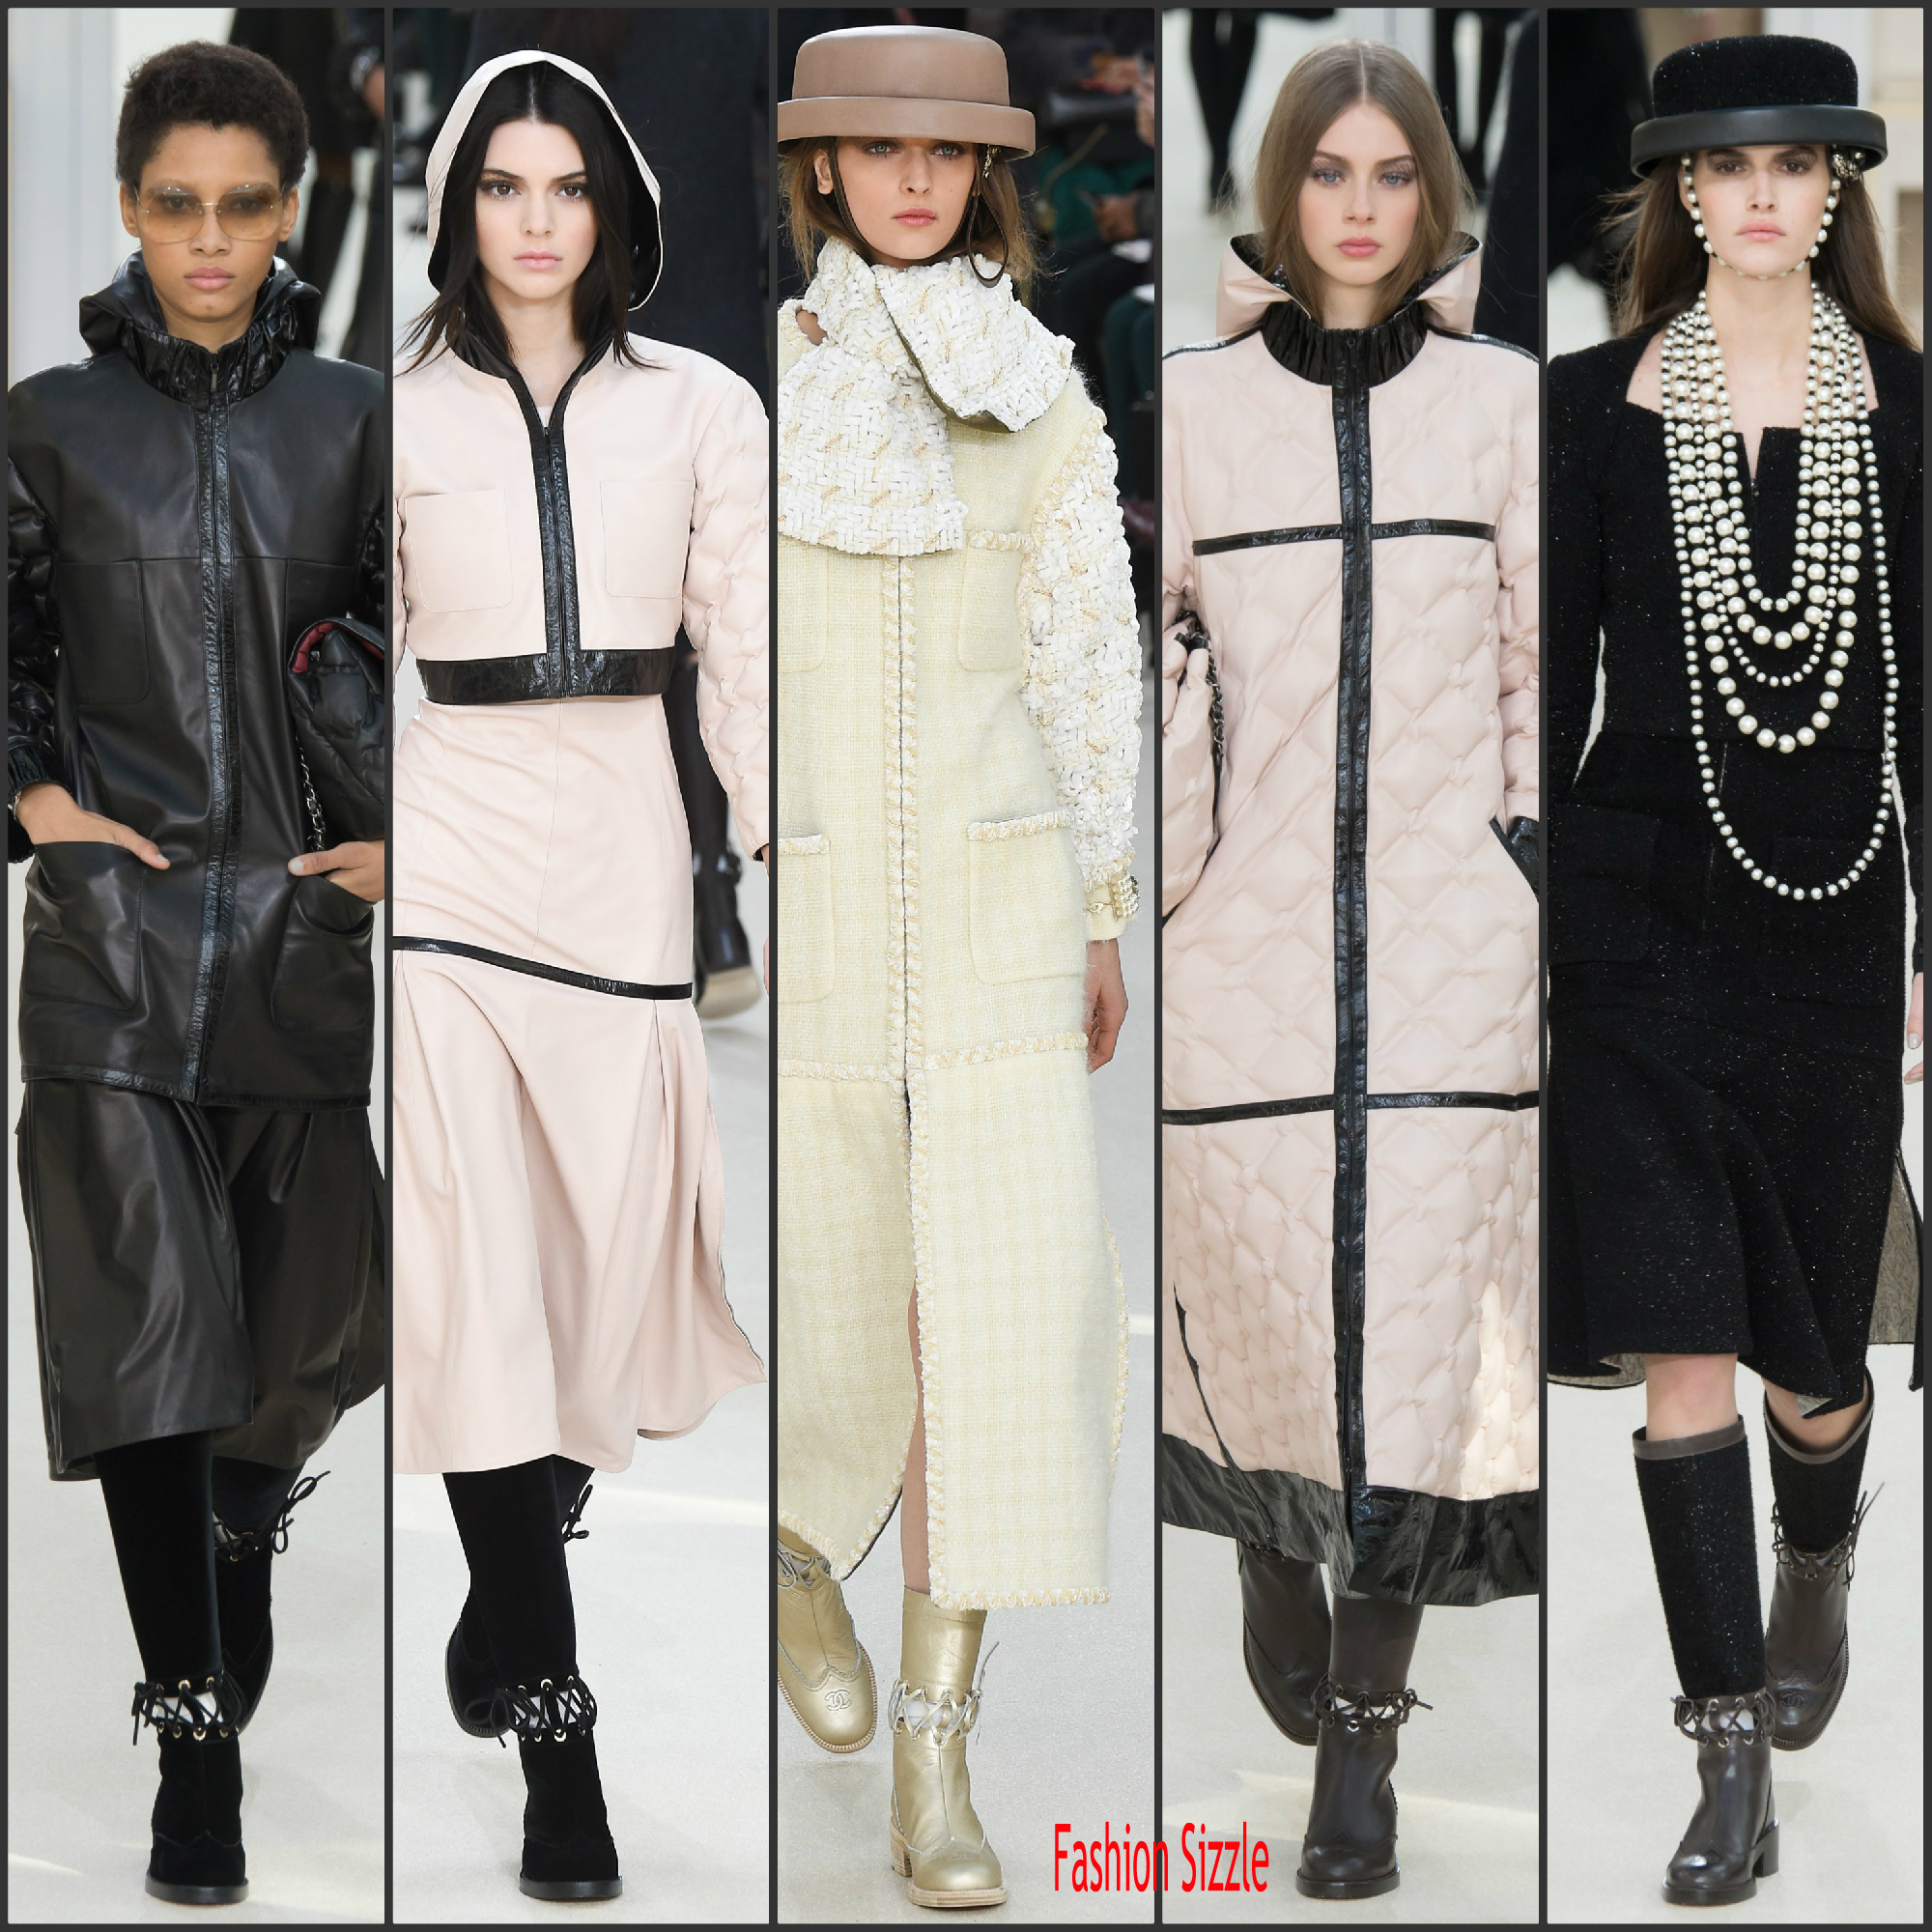 chanel-fall-2016-2017-rtw-pfw-collection